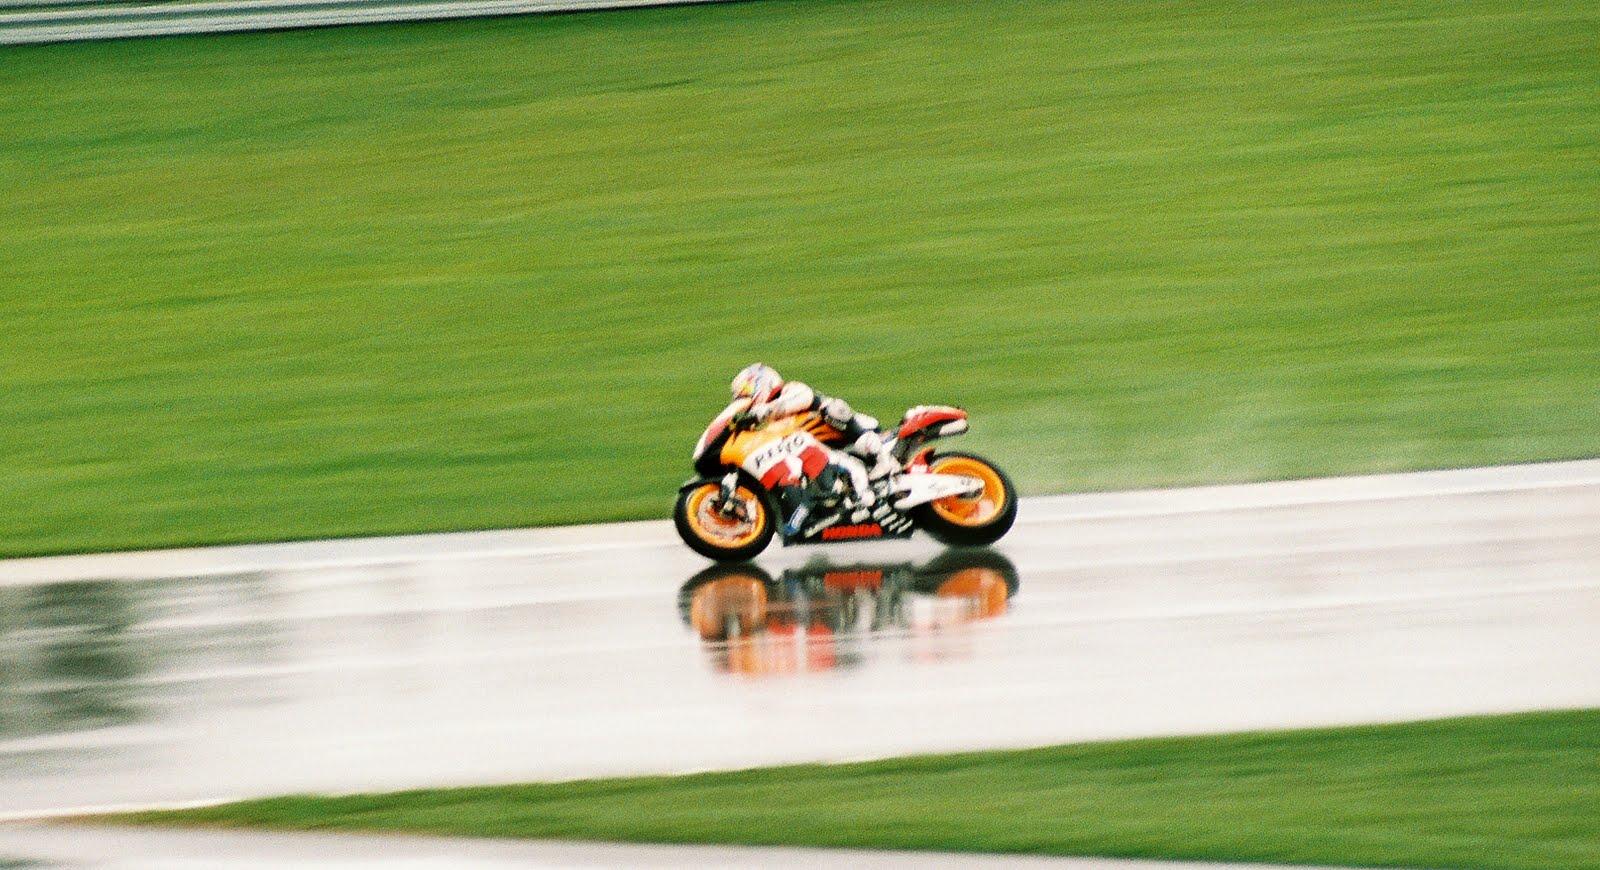 Stus Shots R Us MotoGP Rain Washes Out 1st FP Session in Portugal, Saturday Schedule Re-Mixed